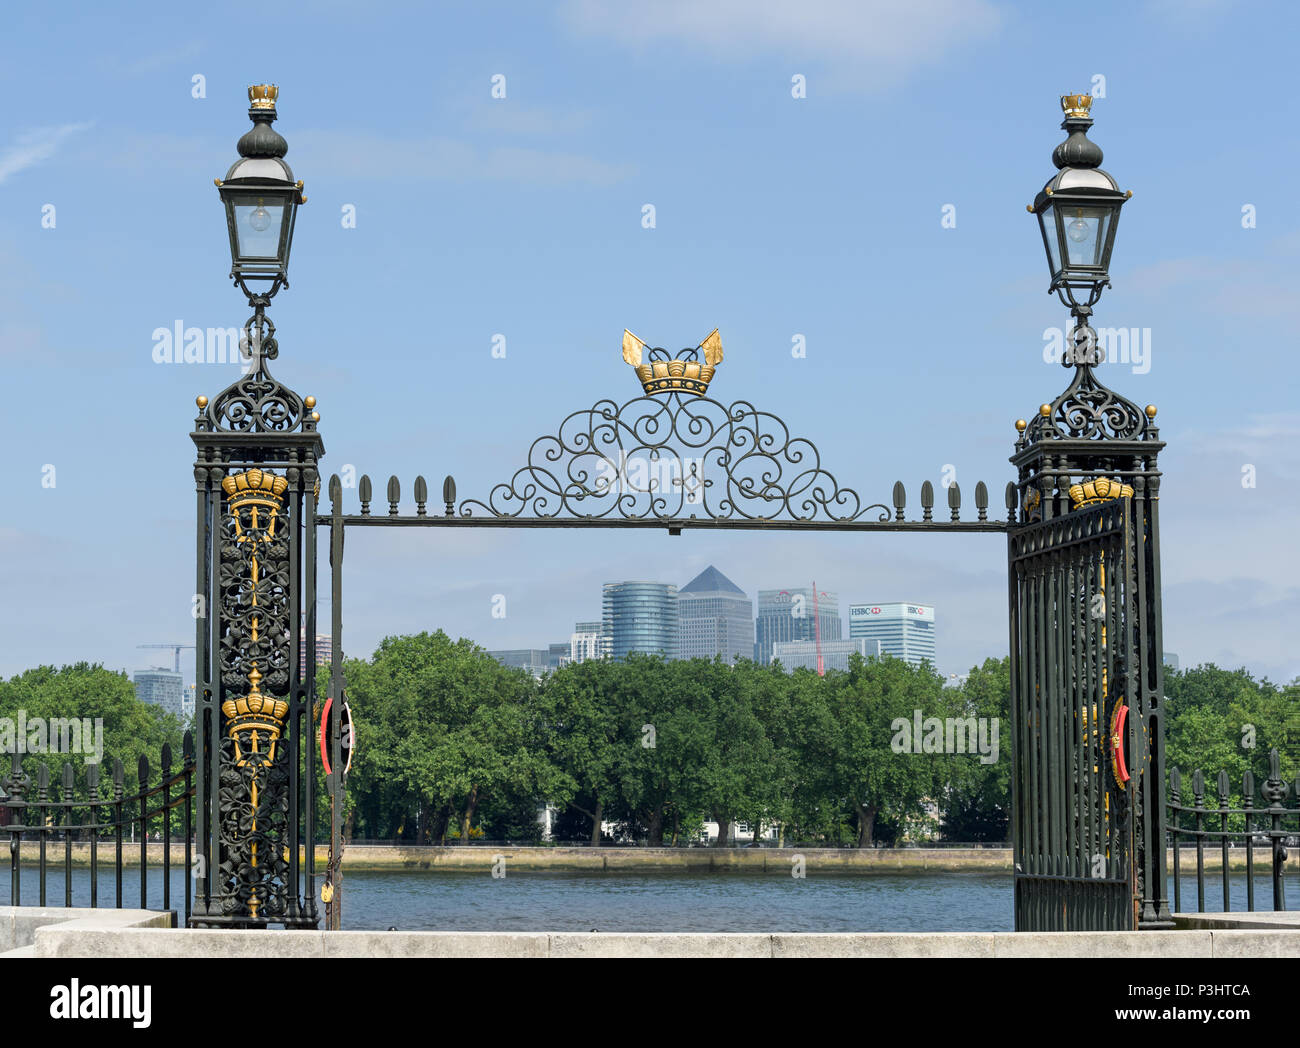 Wrought iron gate of the royal naval college at Greenwich, London, England, looking out across the river Thames to the Isle of Dogs and Canary Wharf. Stock Photo